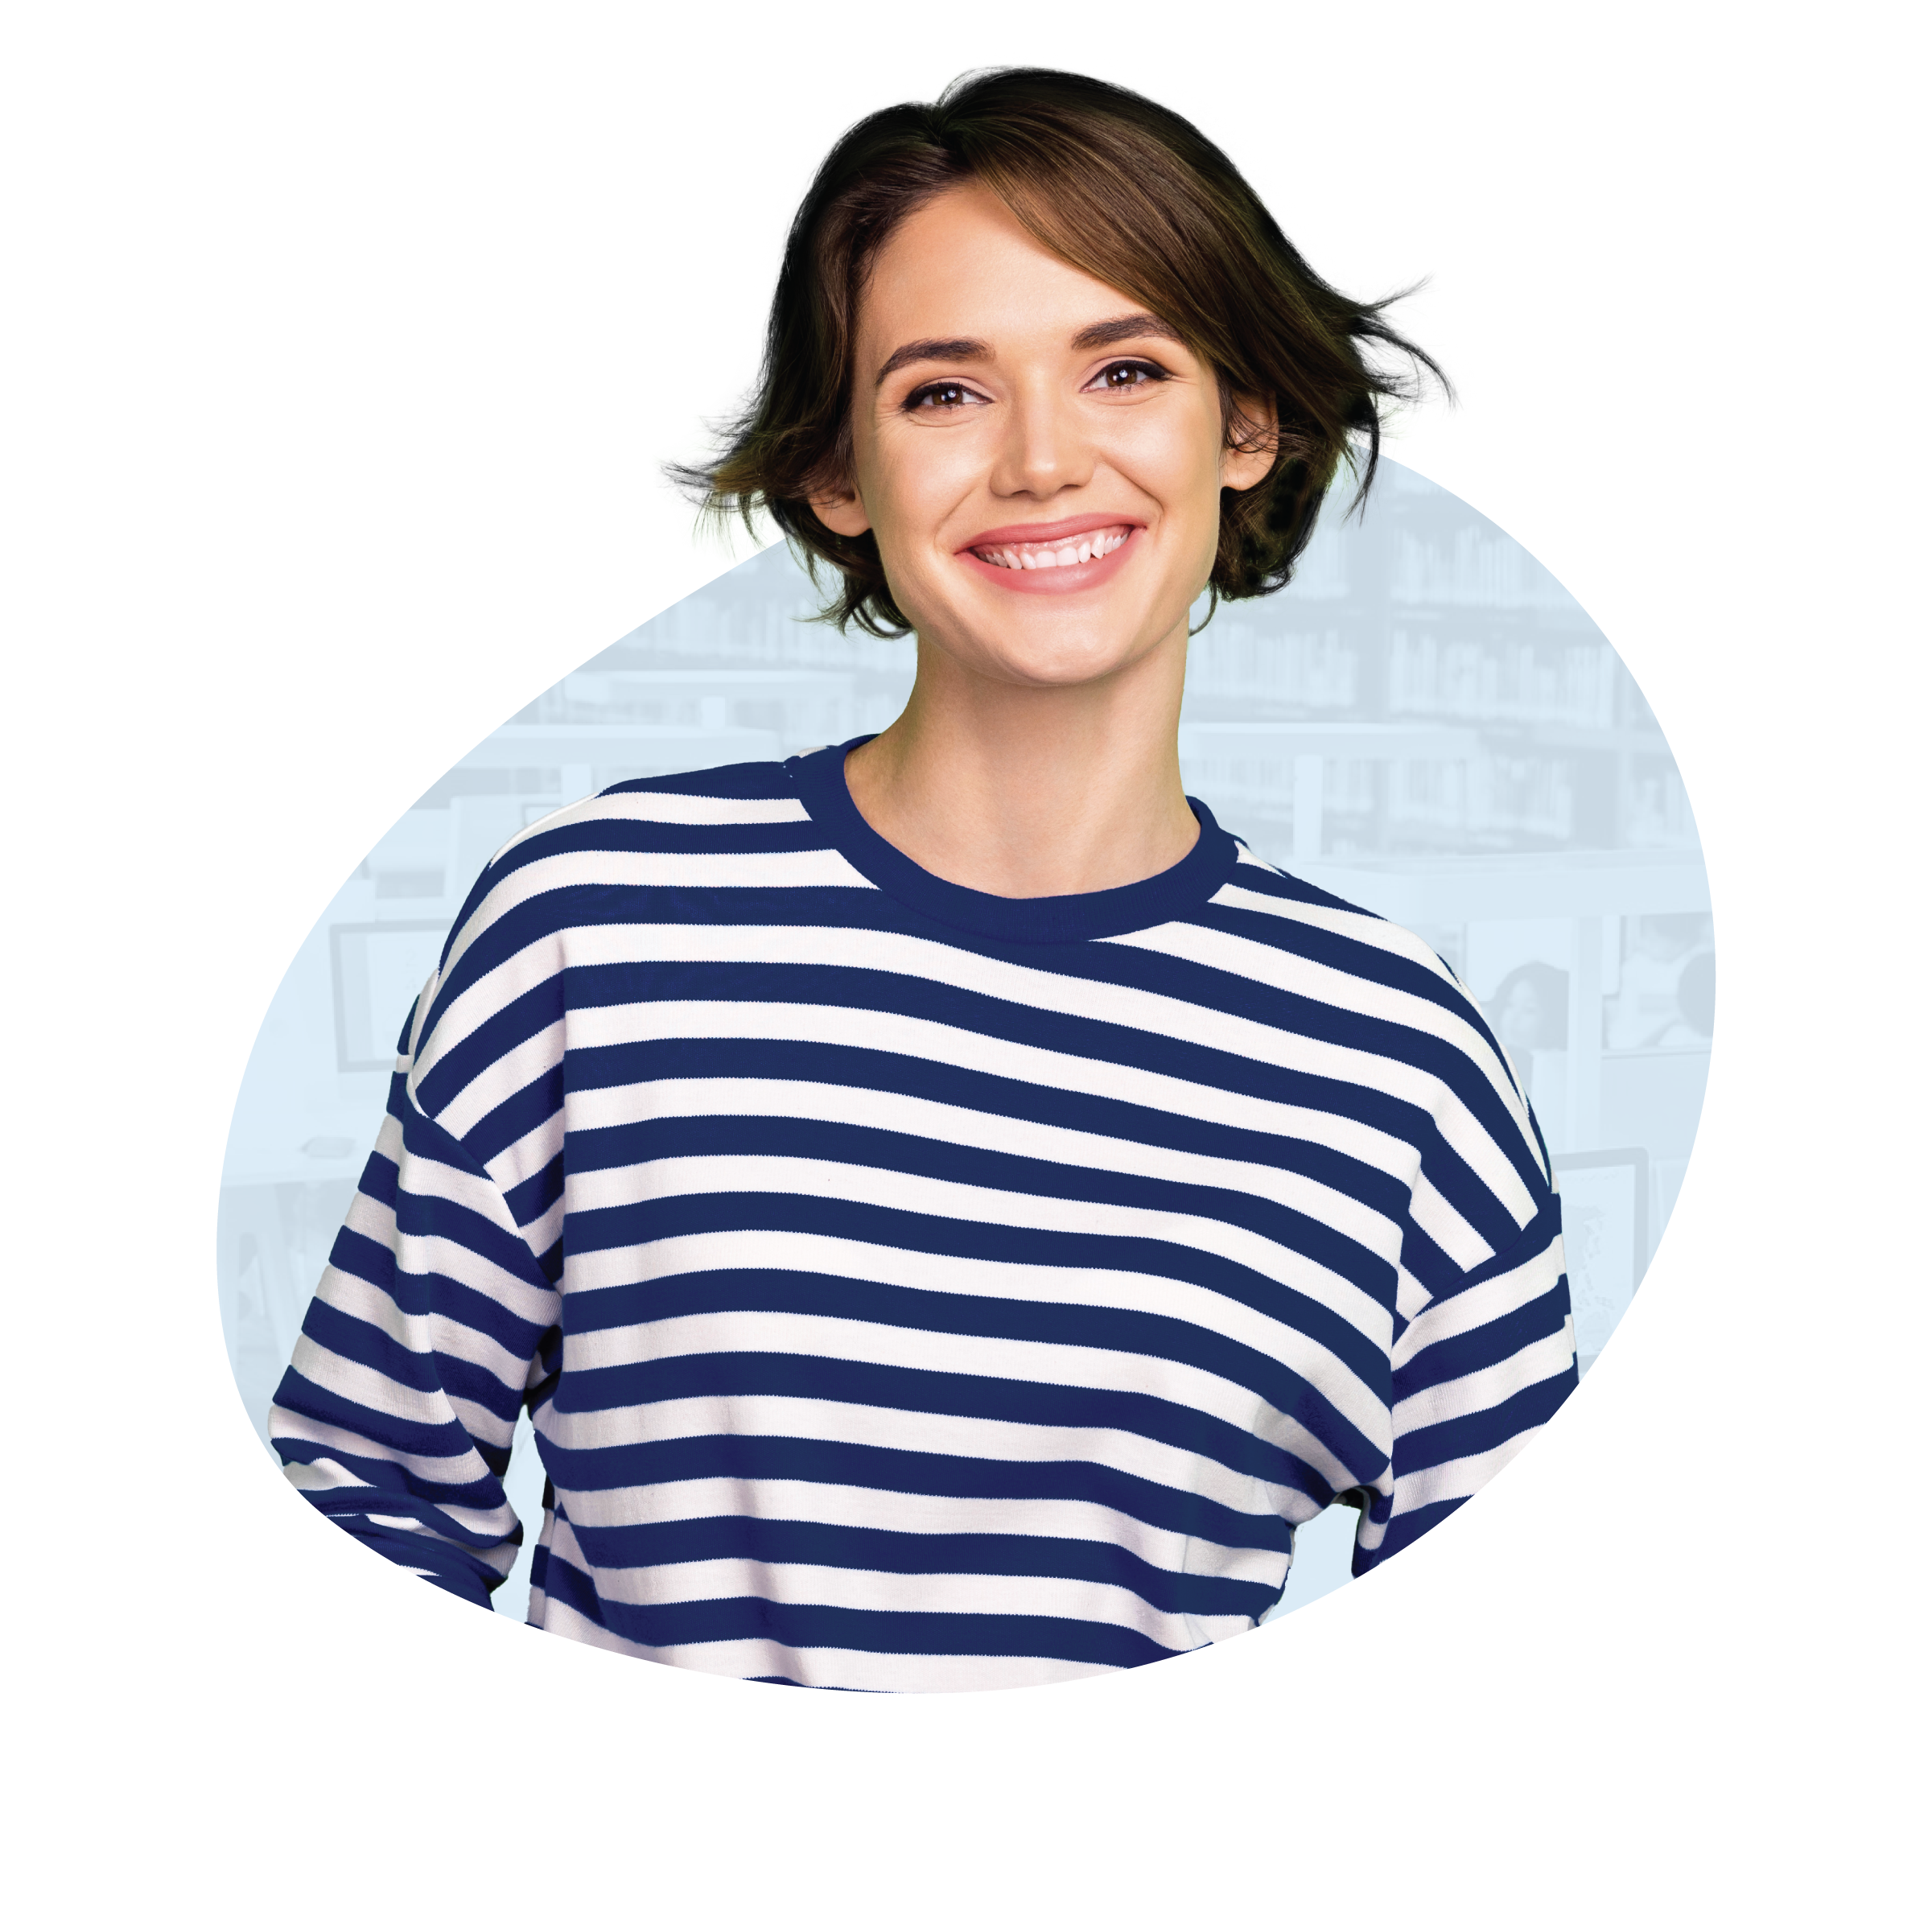 Excited young woman substitute teacher in striped shirt in front of a circular faded school library background